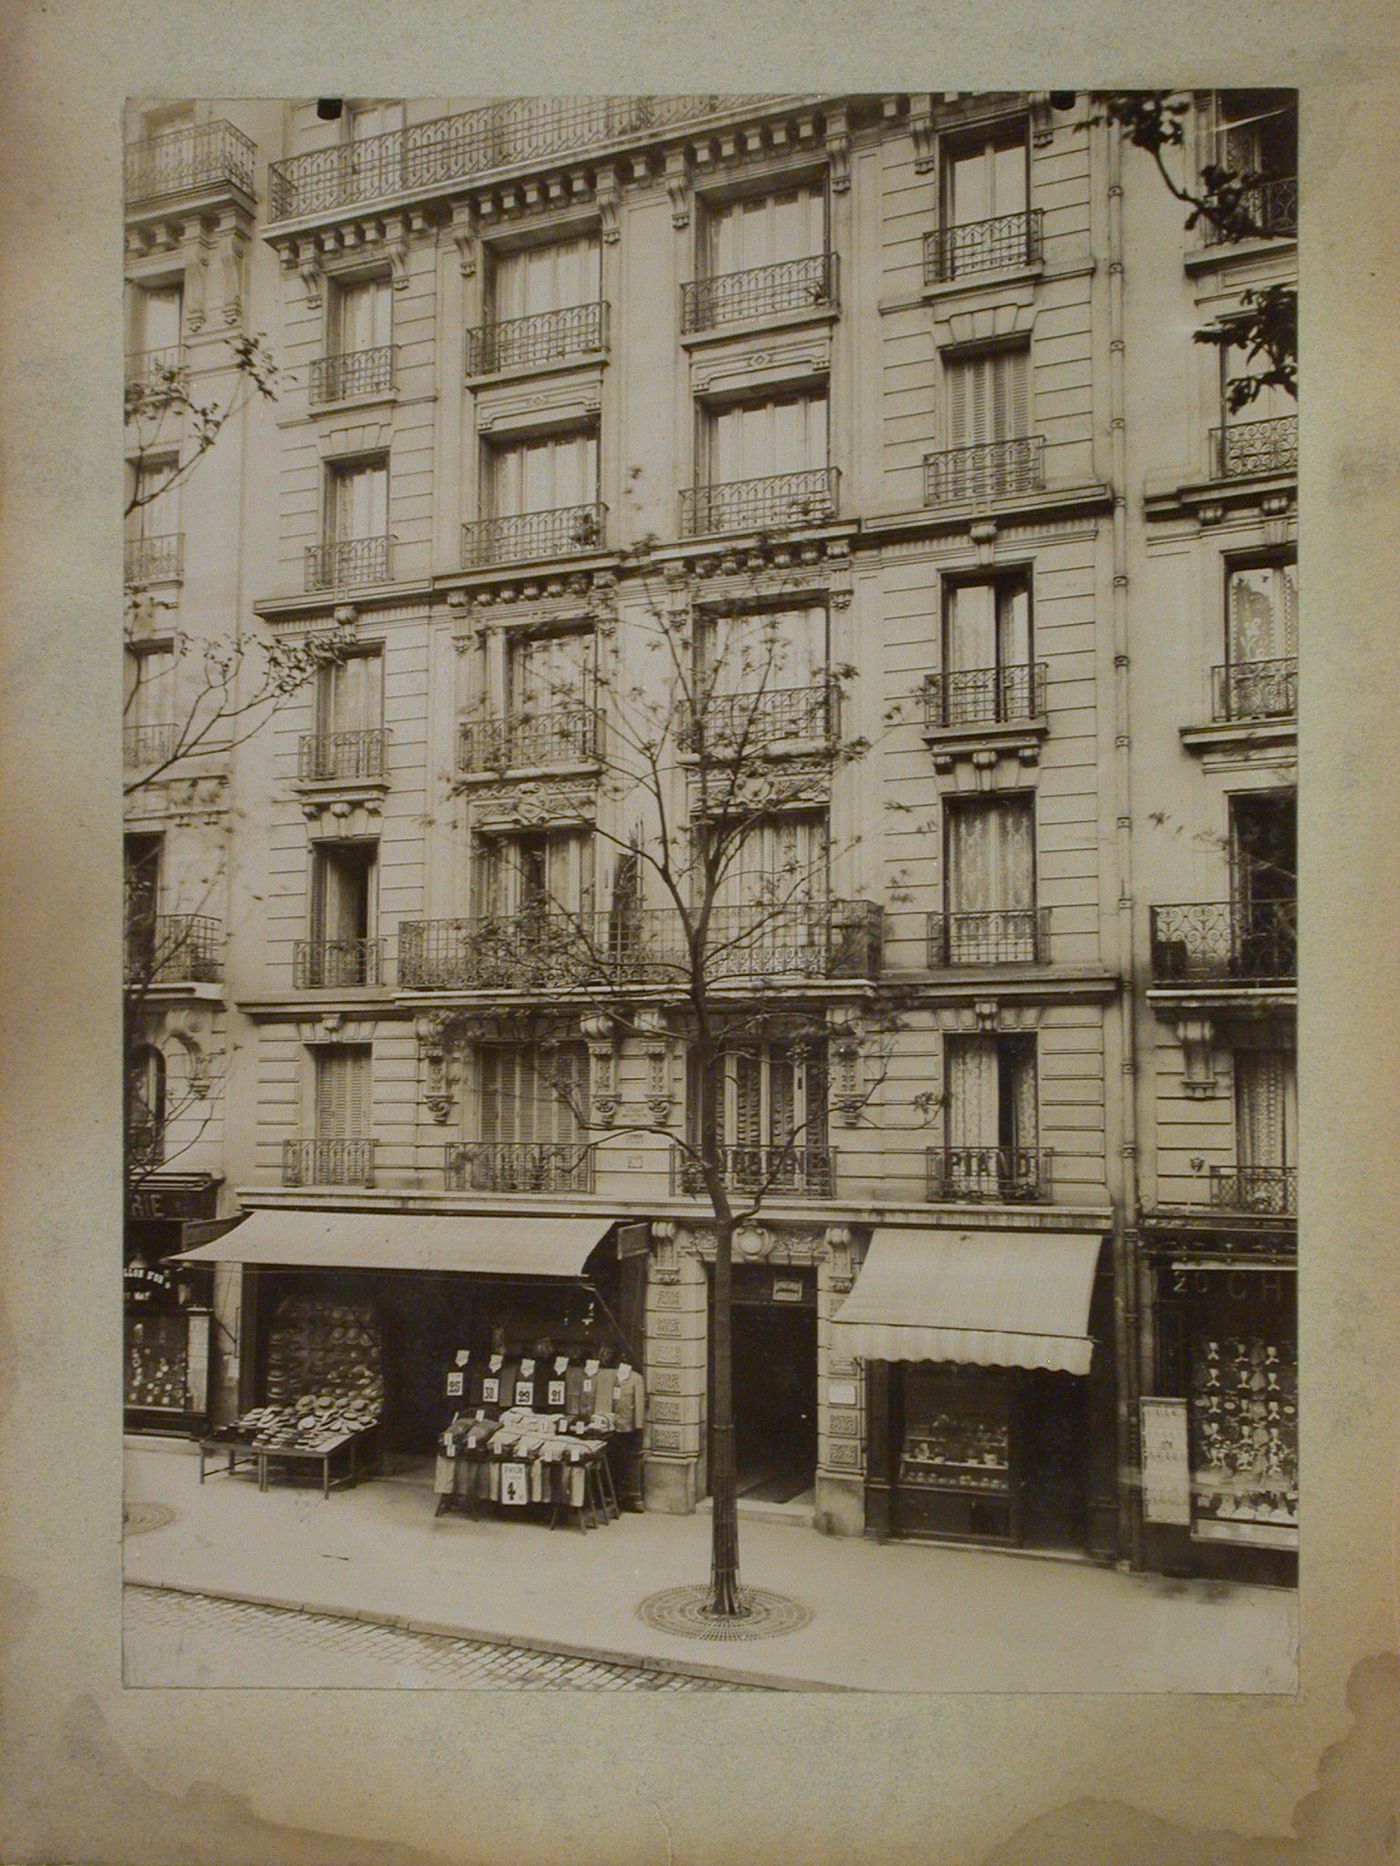 View of stores and partial view of apartment houses, Paris, France